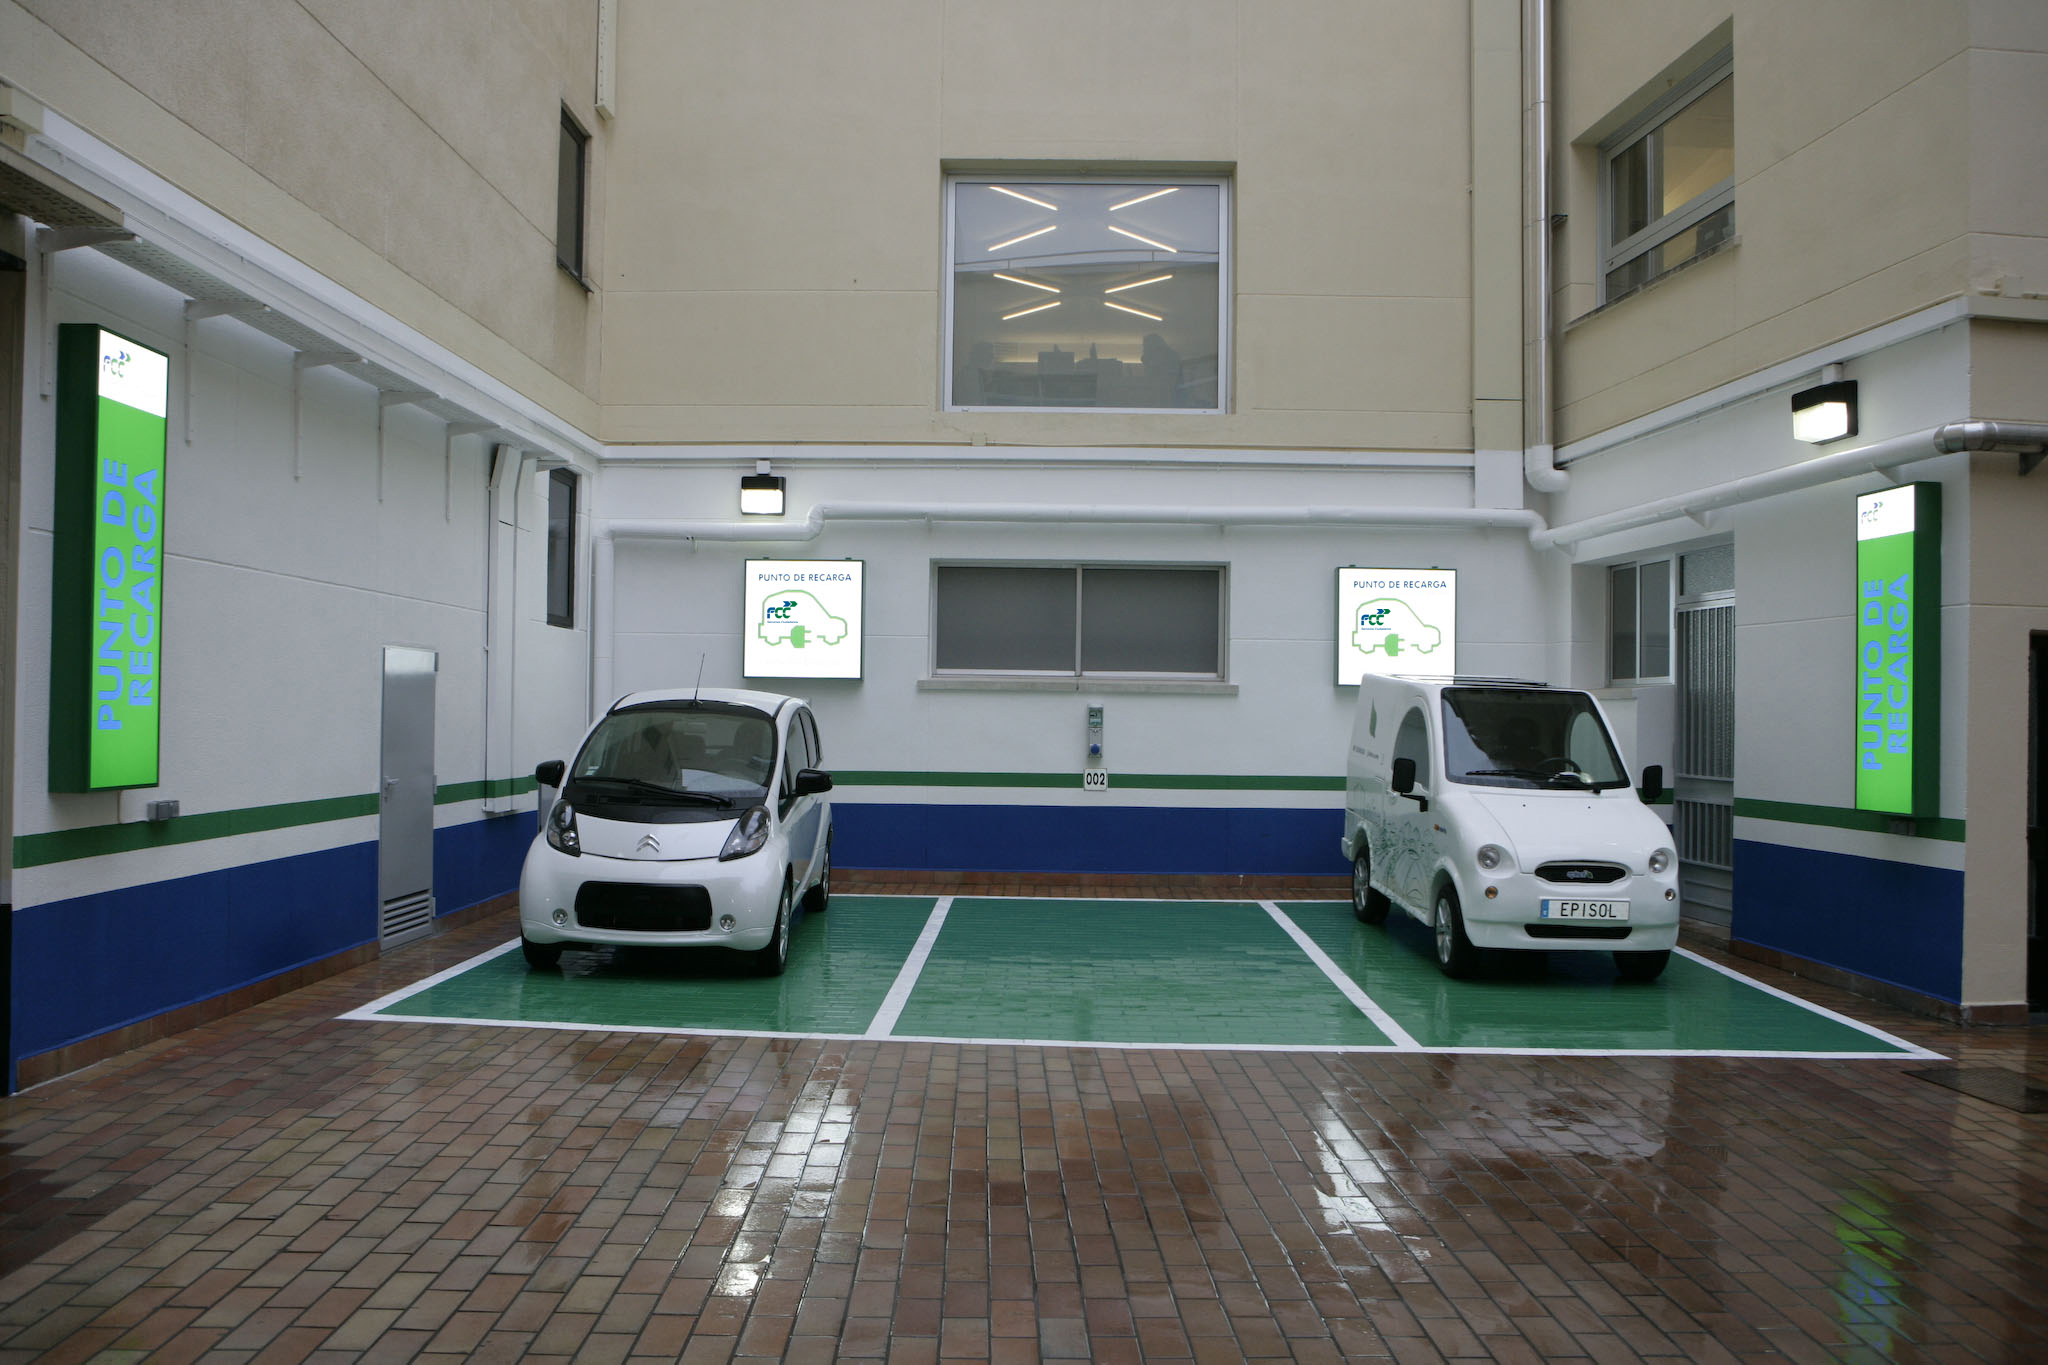 Parking spaces with electric car charging points.